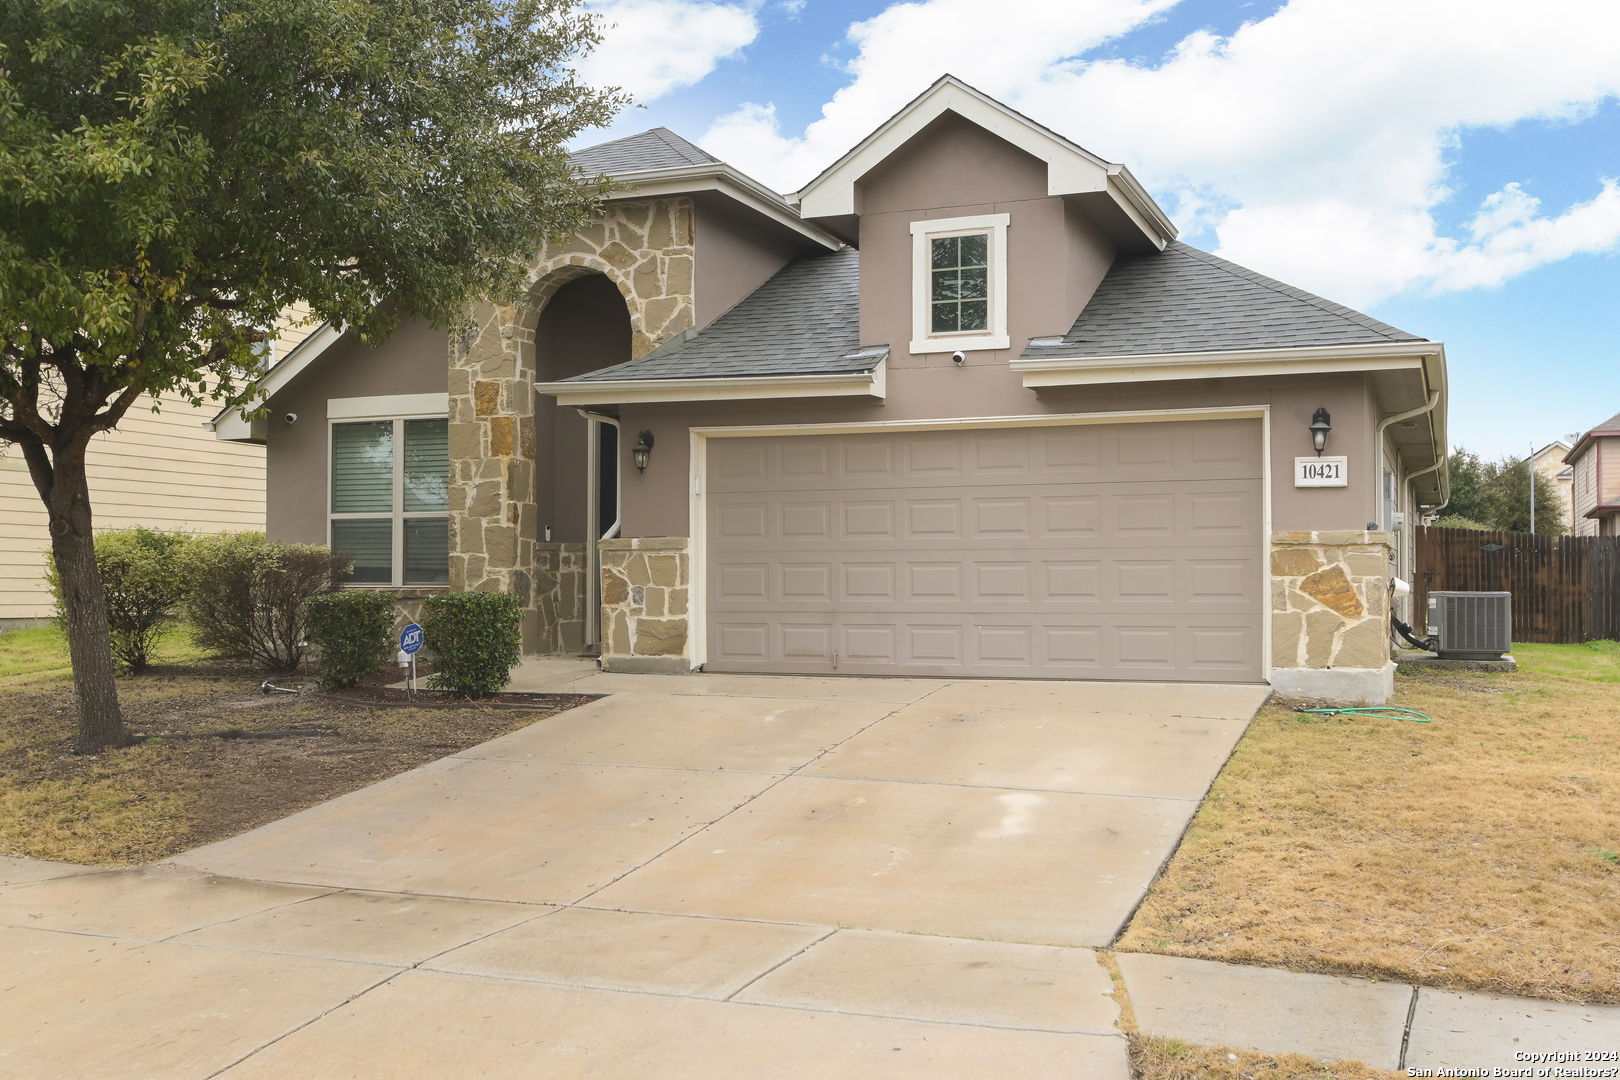 Photo of 10421 Macarthur Wy in Converse, TX